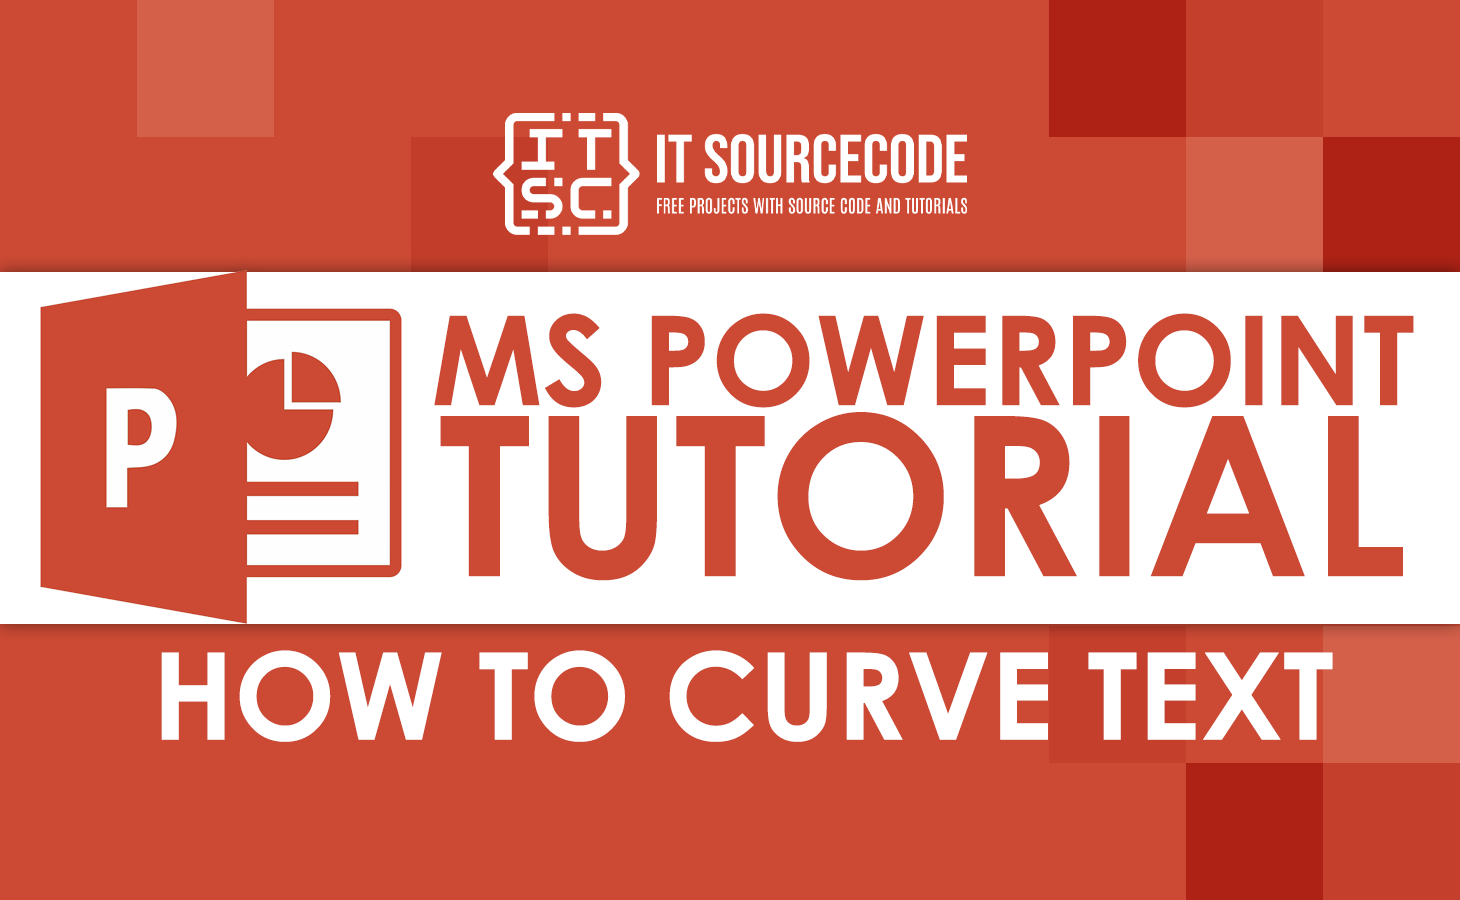 MS Powerpoint Tutorial how to curve text